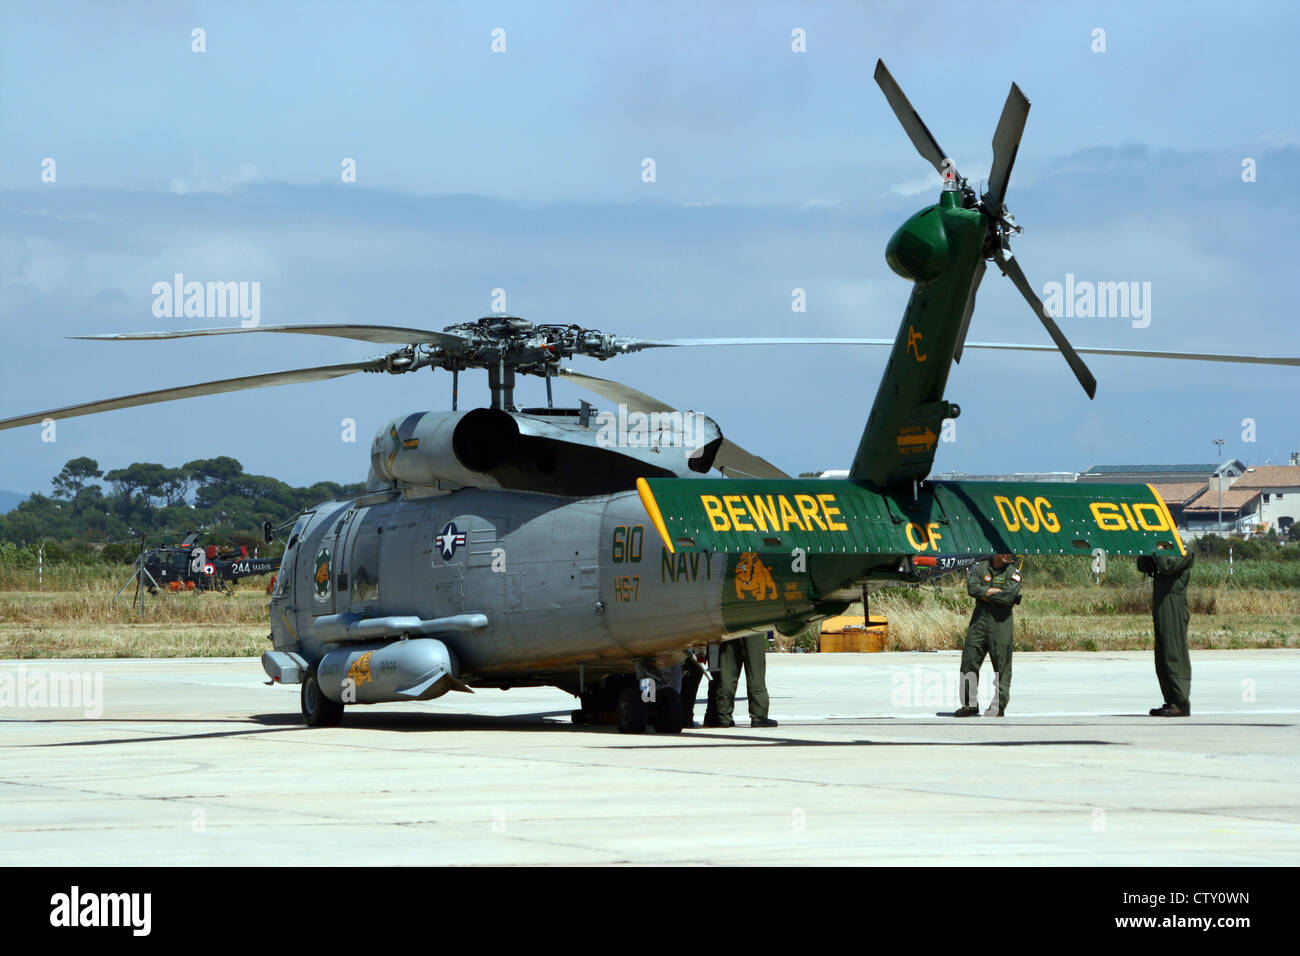 US Navy Sea Hawk helicopter at Hyeres airshow. France Stock Photo